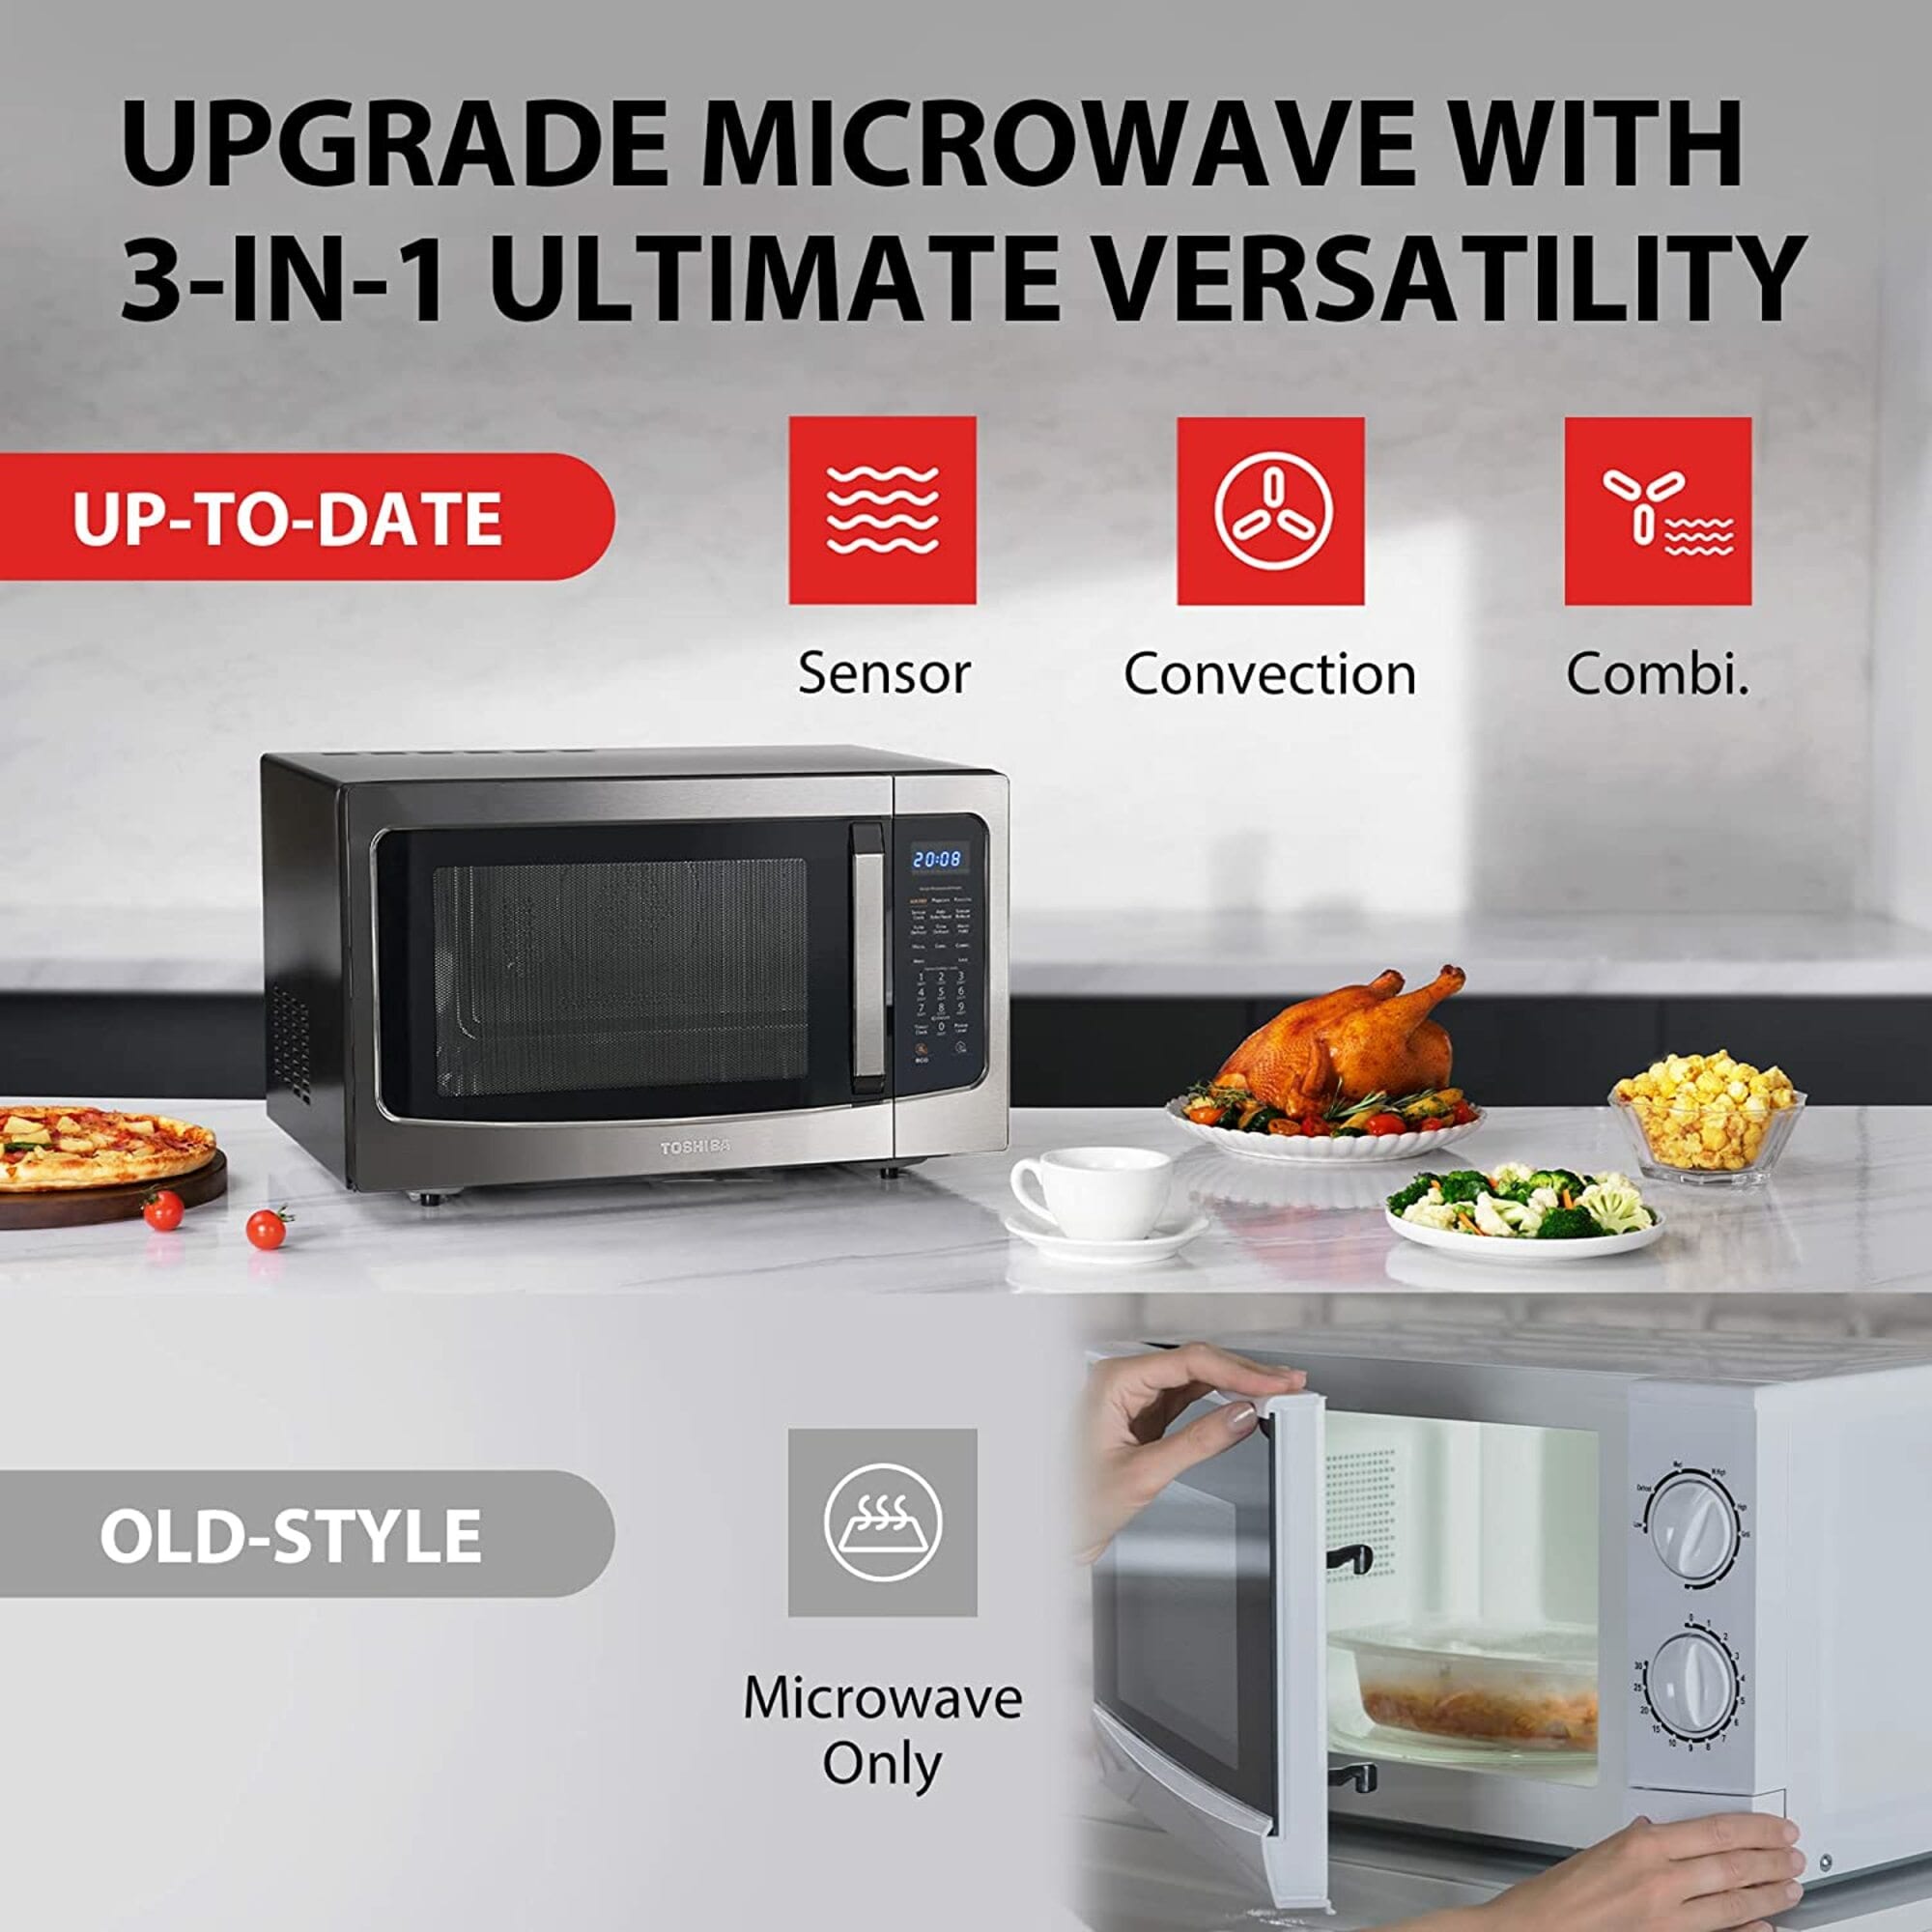 TOSHIBA 4-in-1, 1.5 cu. ft., Countertop Microwave Oven, Smart